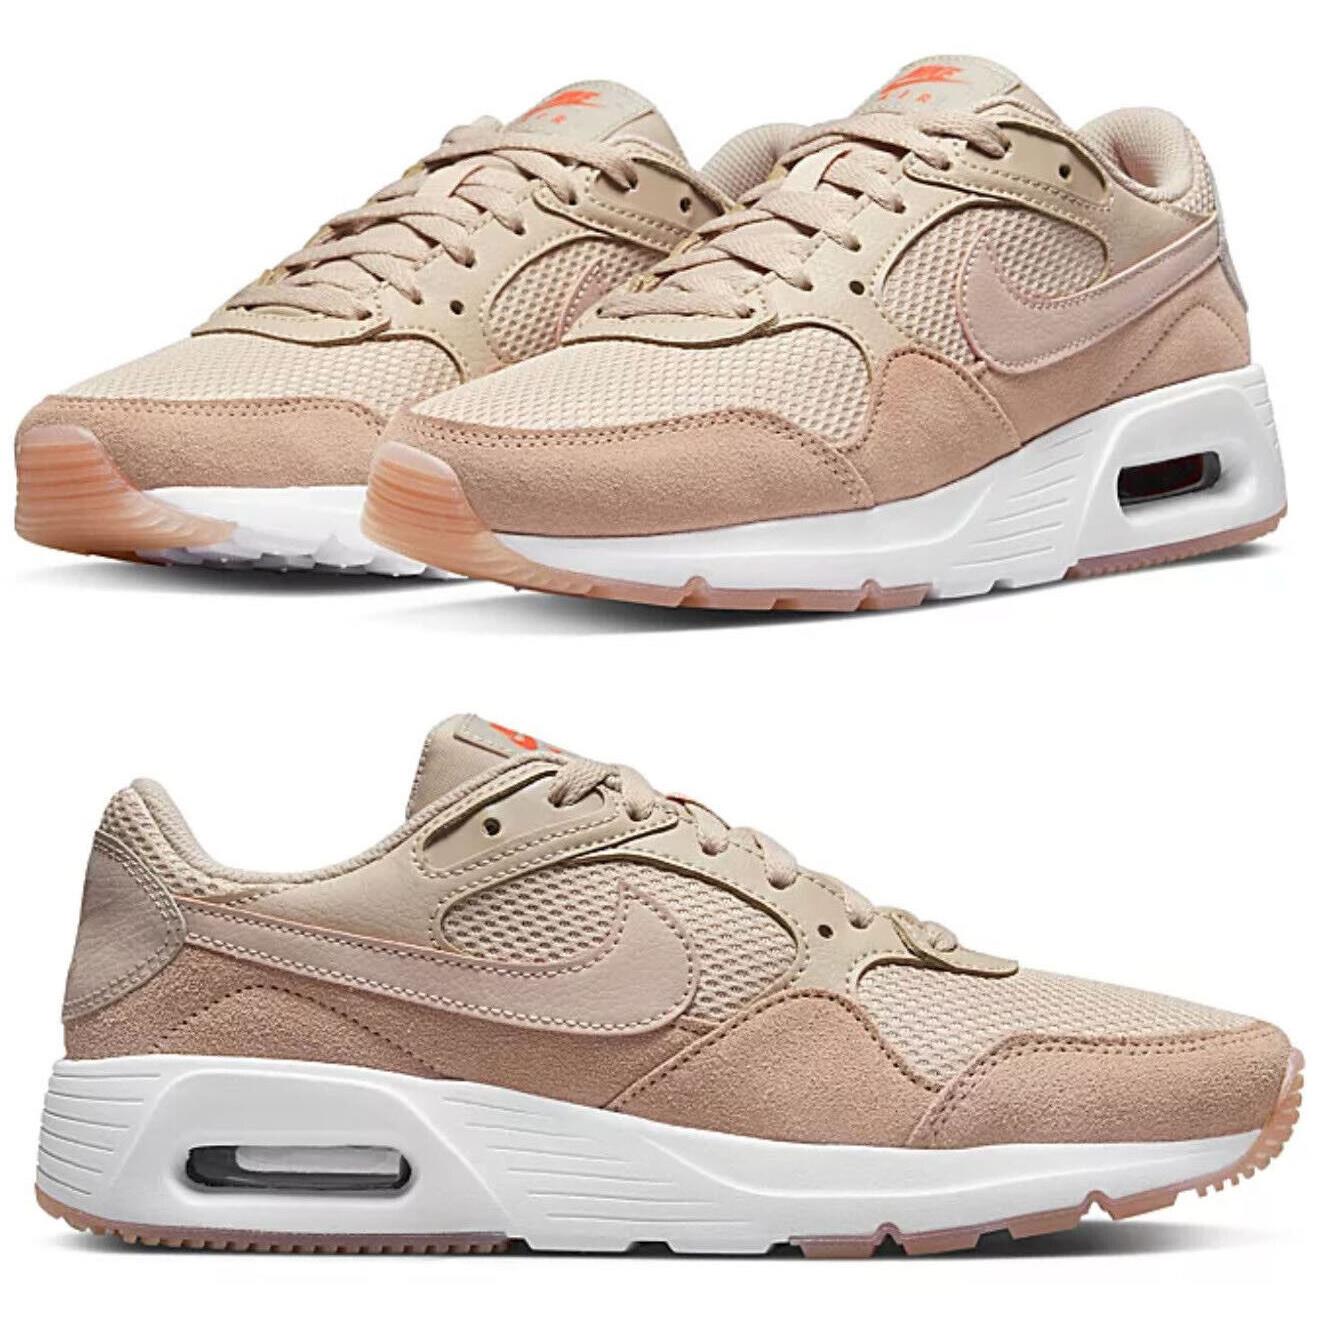 Nike Air Max SC Casual Shoes Gym Women`s Athletic Sneakers Blush All Sizes